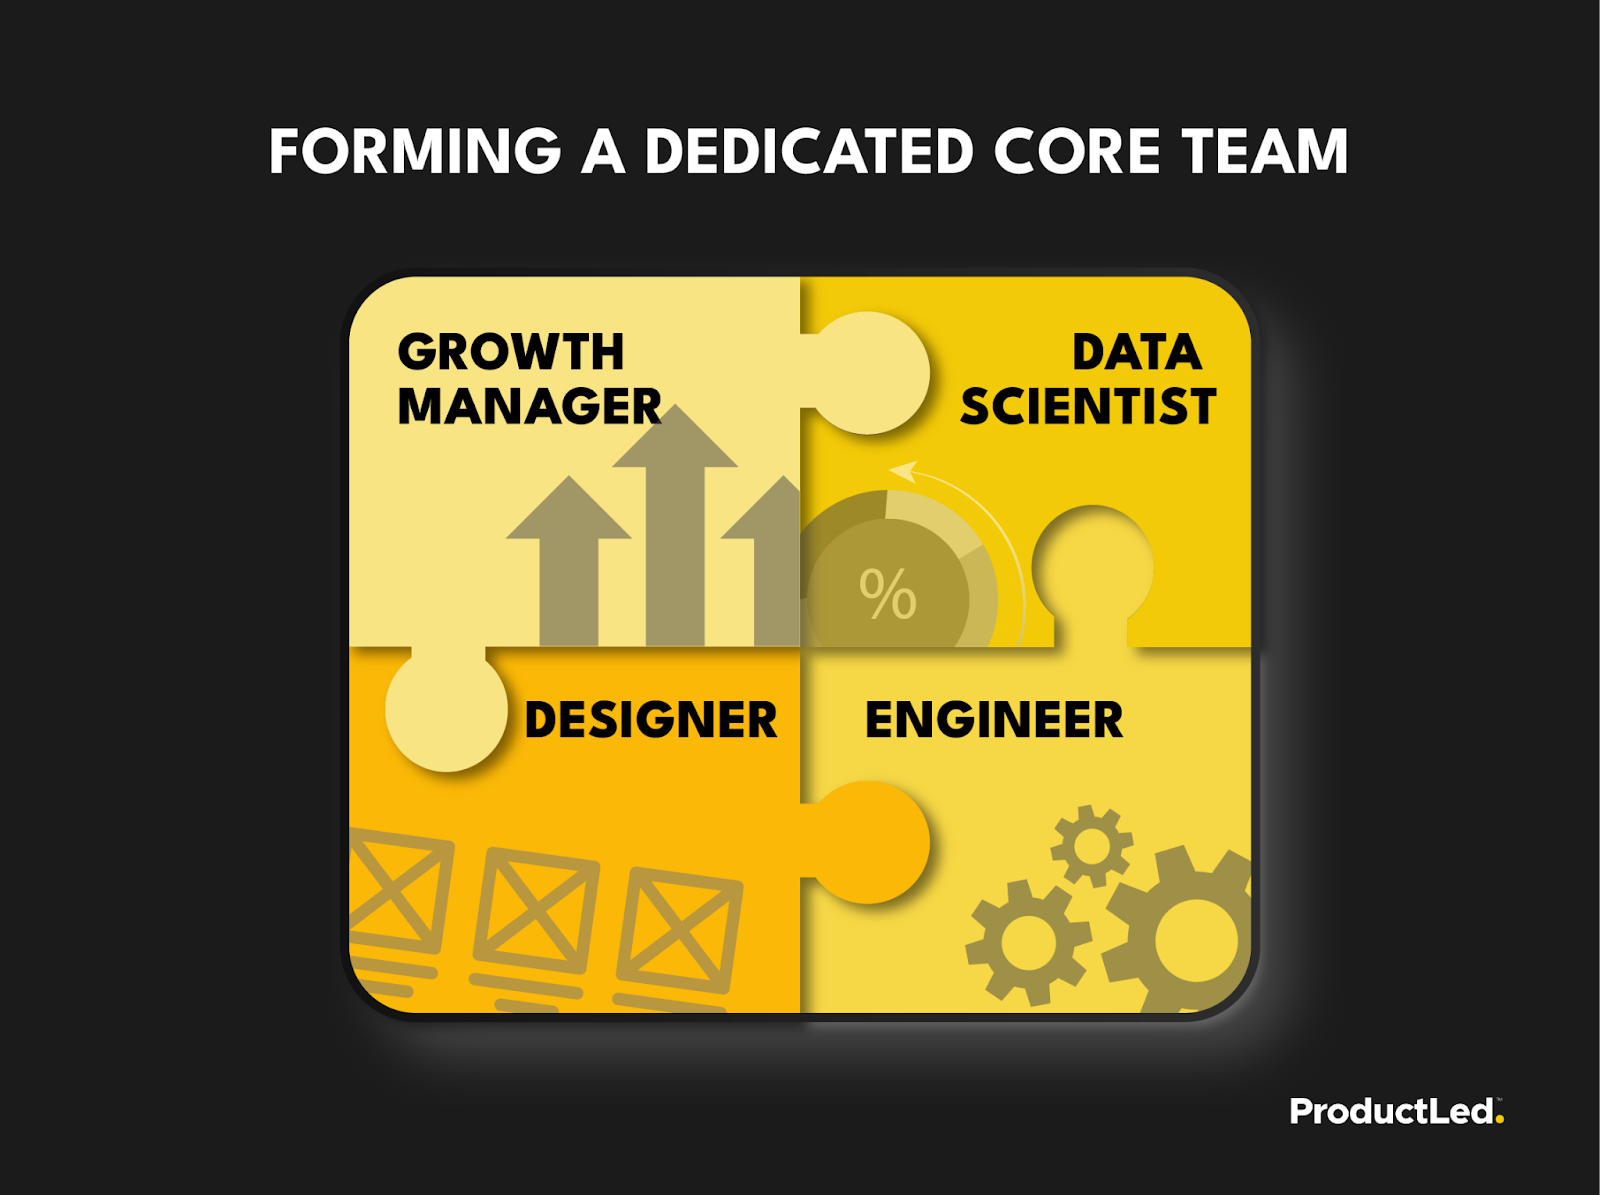 Your basic core team for product-led growth is growth manager, data scientist, designer and engineer. 